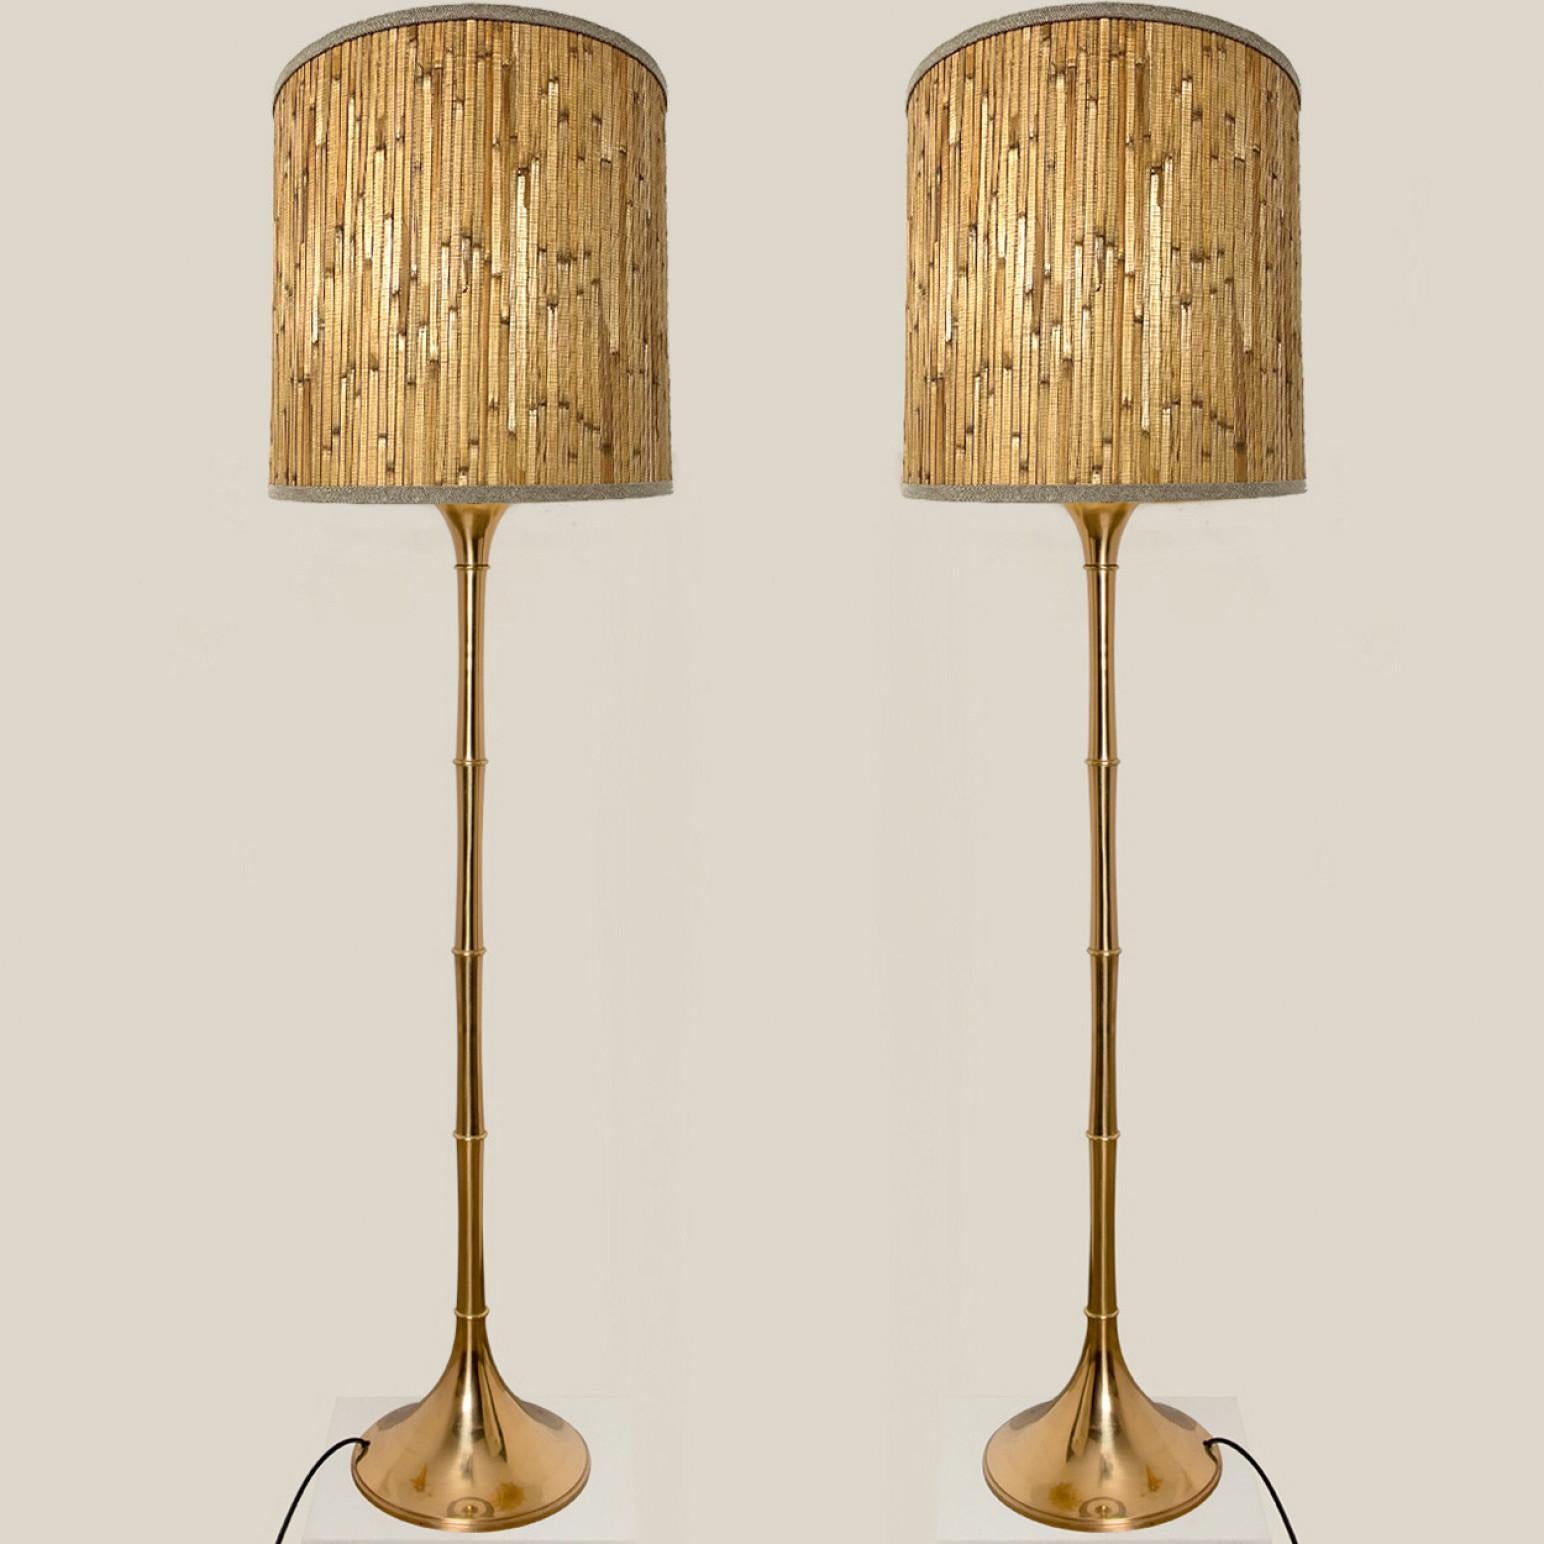 Pair of Floor Lamps Gold Brass and Bamoboo Shade by Ingo Maurer, Germany, 1968 For Sale 7